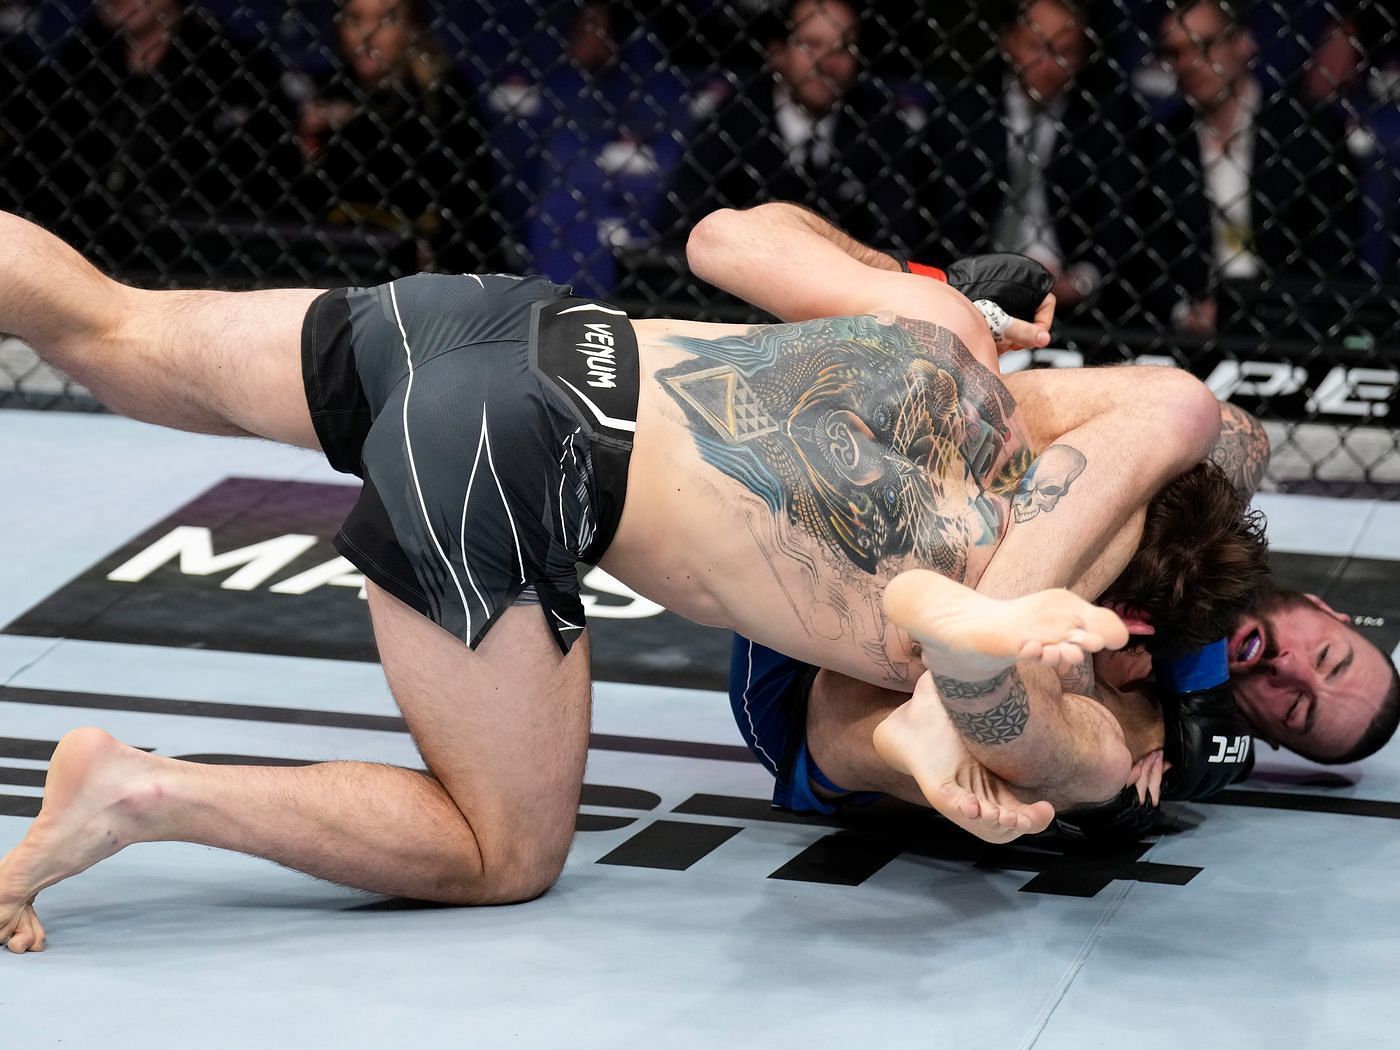 Paul Craig showed off his excellent submission skills again to defeat Nikita Krylov.